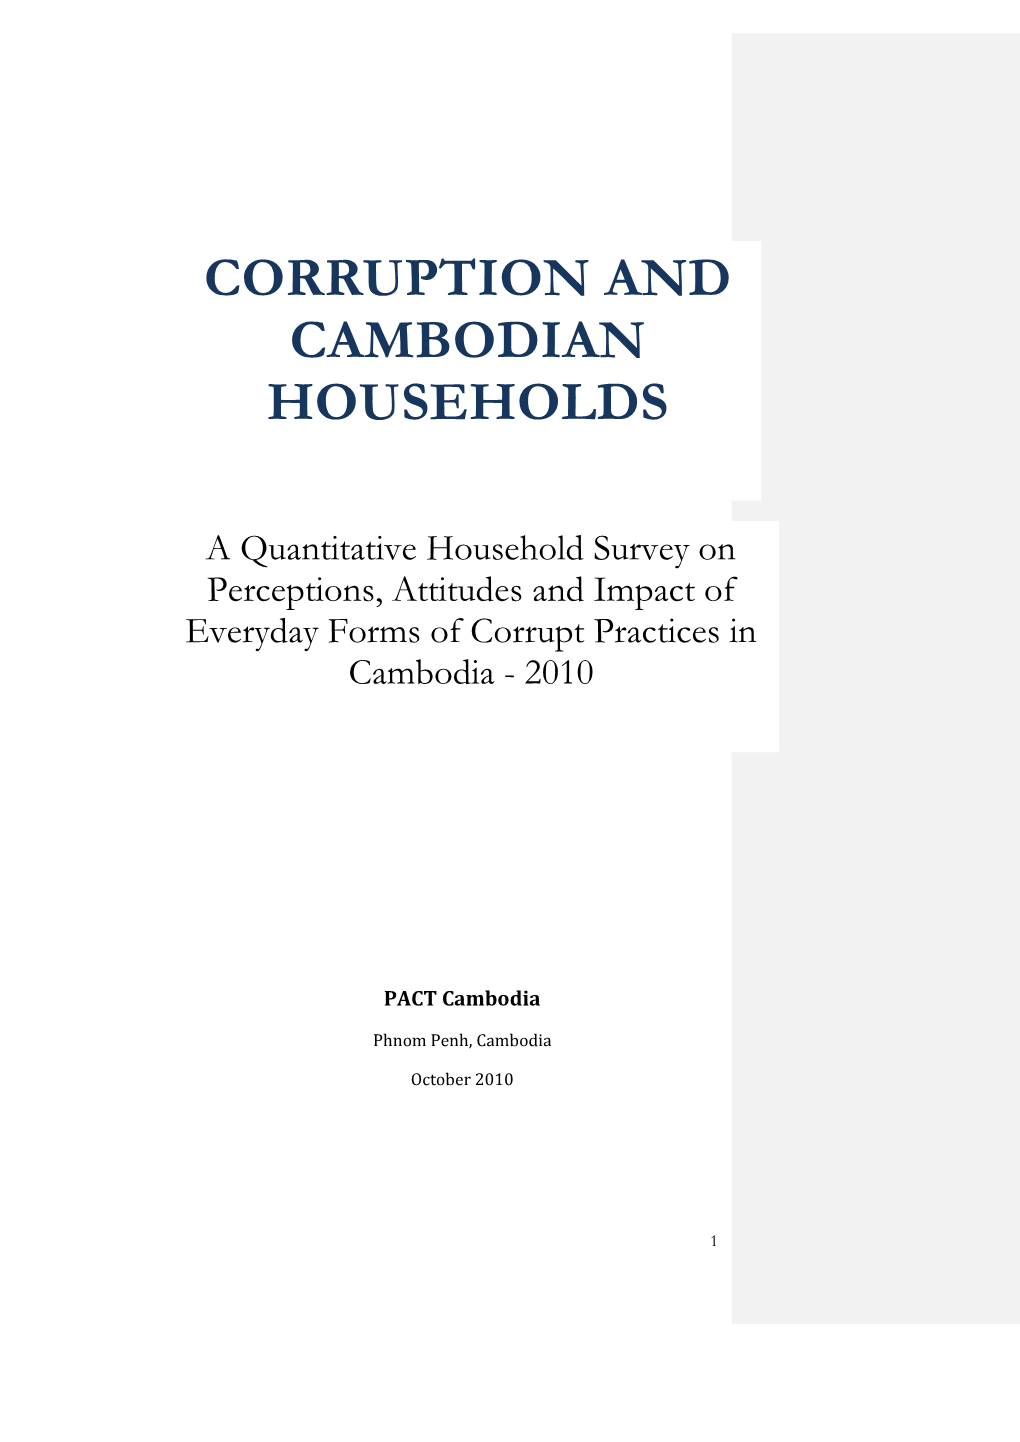 Corruption and Cambodian Households